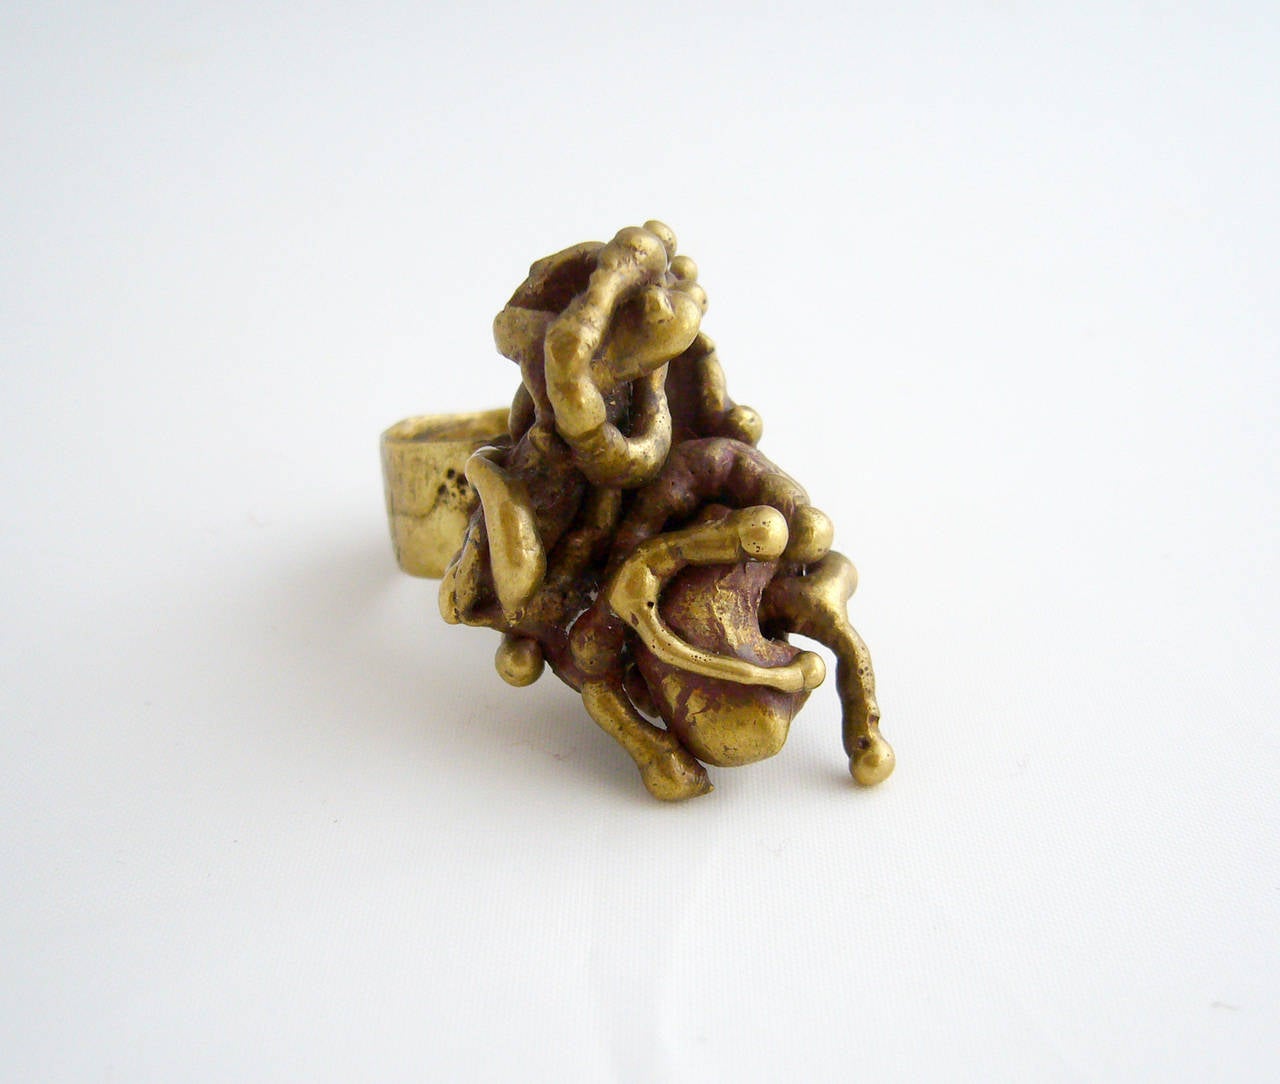 Abstract drippy bronze ring created by Pal Kepenyes of Acapulco, Mexico circa 1970's.  Ring is a finger size 7.25 - 7.5 and is in excellent vintage condition.  Signed Pal Kepenyes on shank.